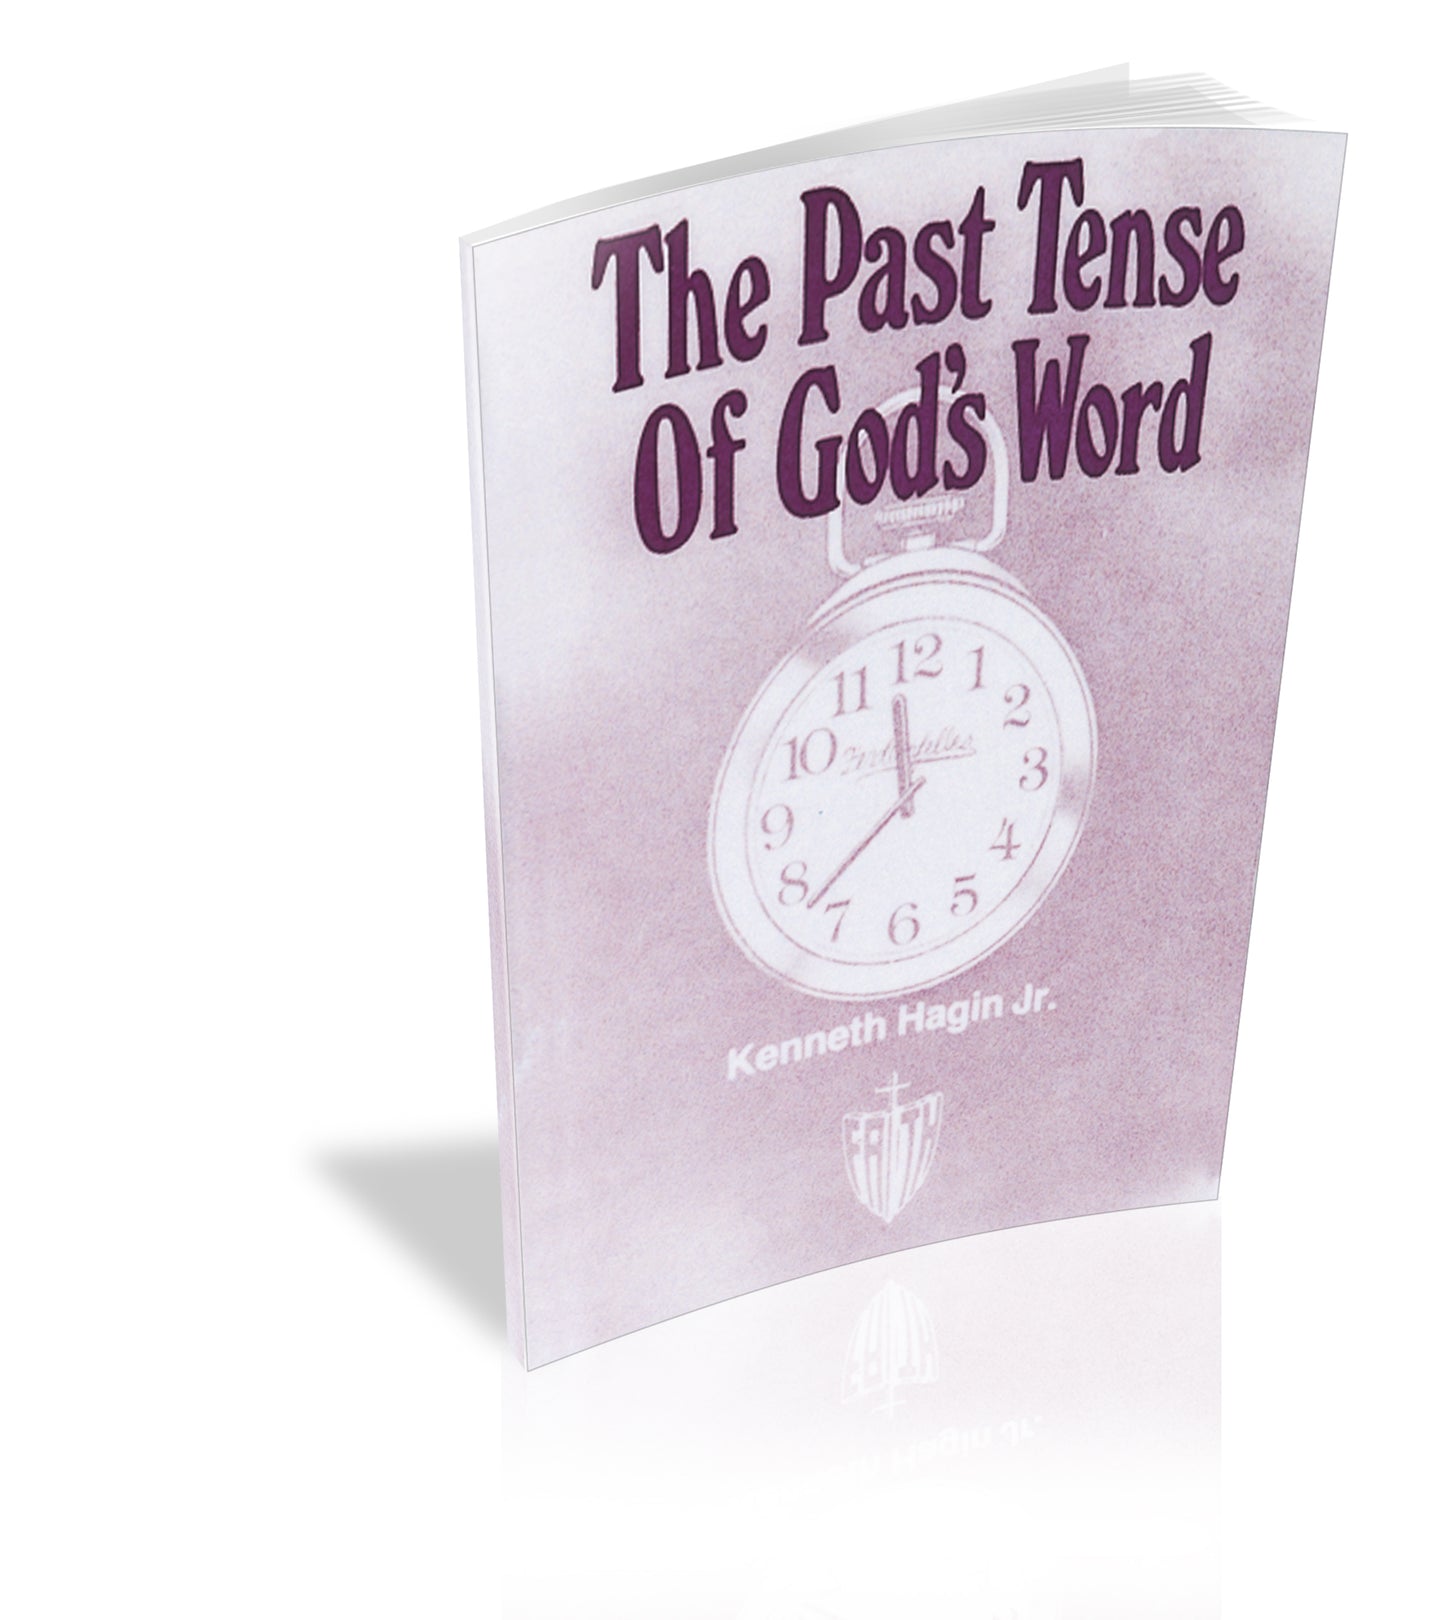 The Past Tense of God’s Word